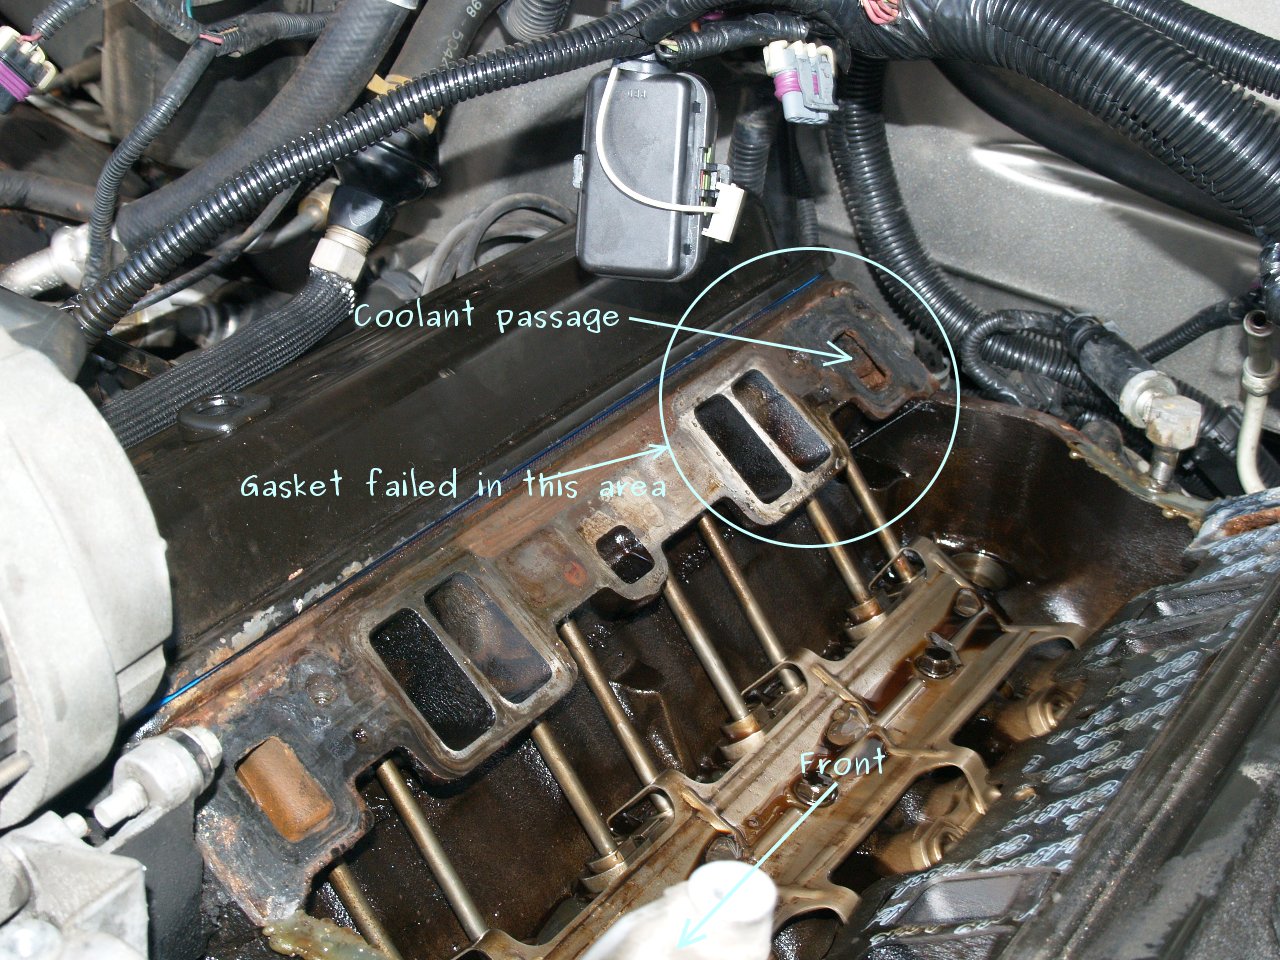 See B1981 in engine